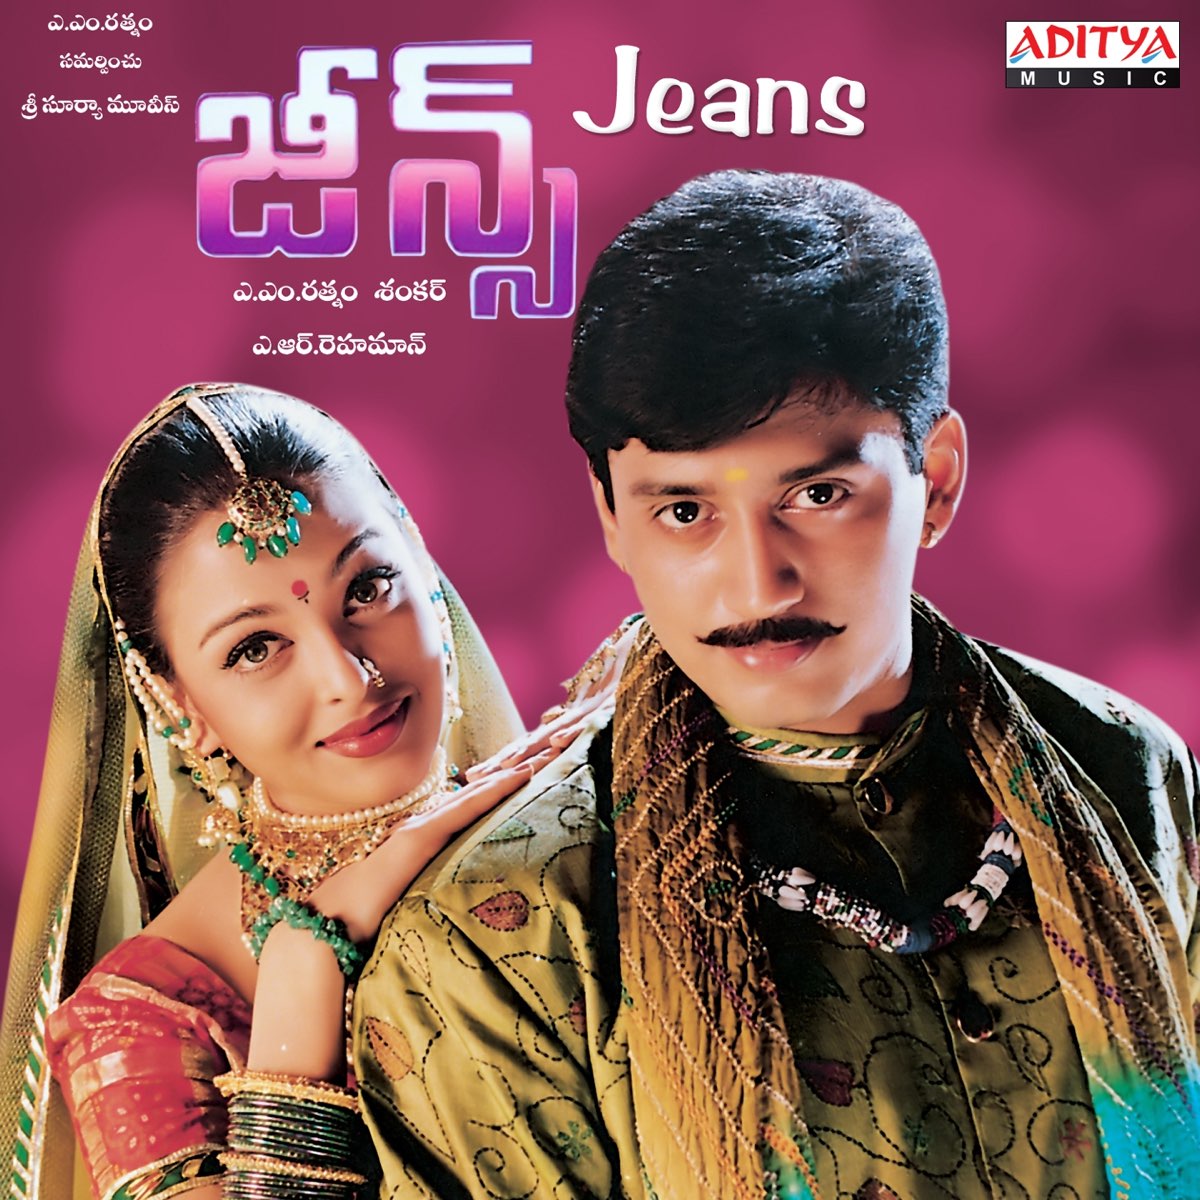 Jeans (Original Motion Picture Soundtrack) by A.R. Rahman on Apple Music